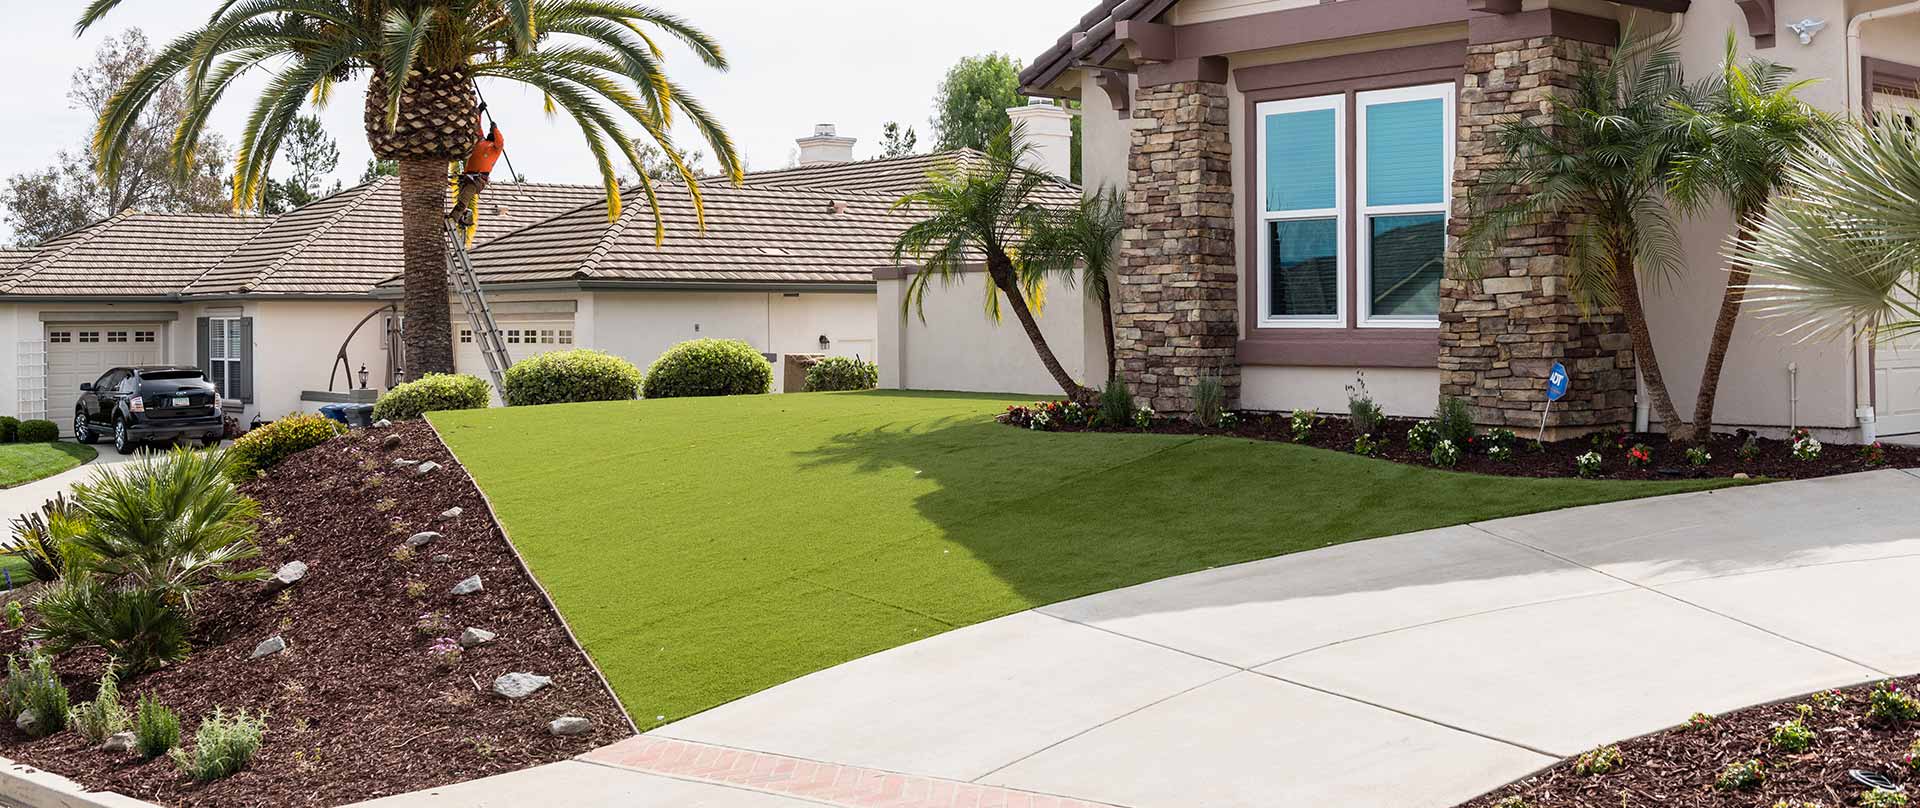 How Much Does Artificial Turf Cost in San Diego, CA?